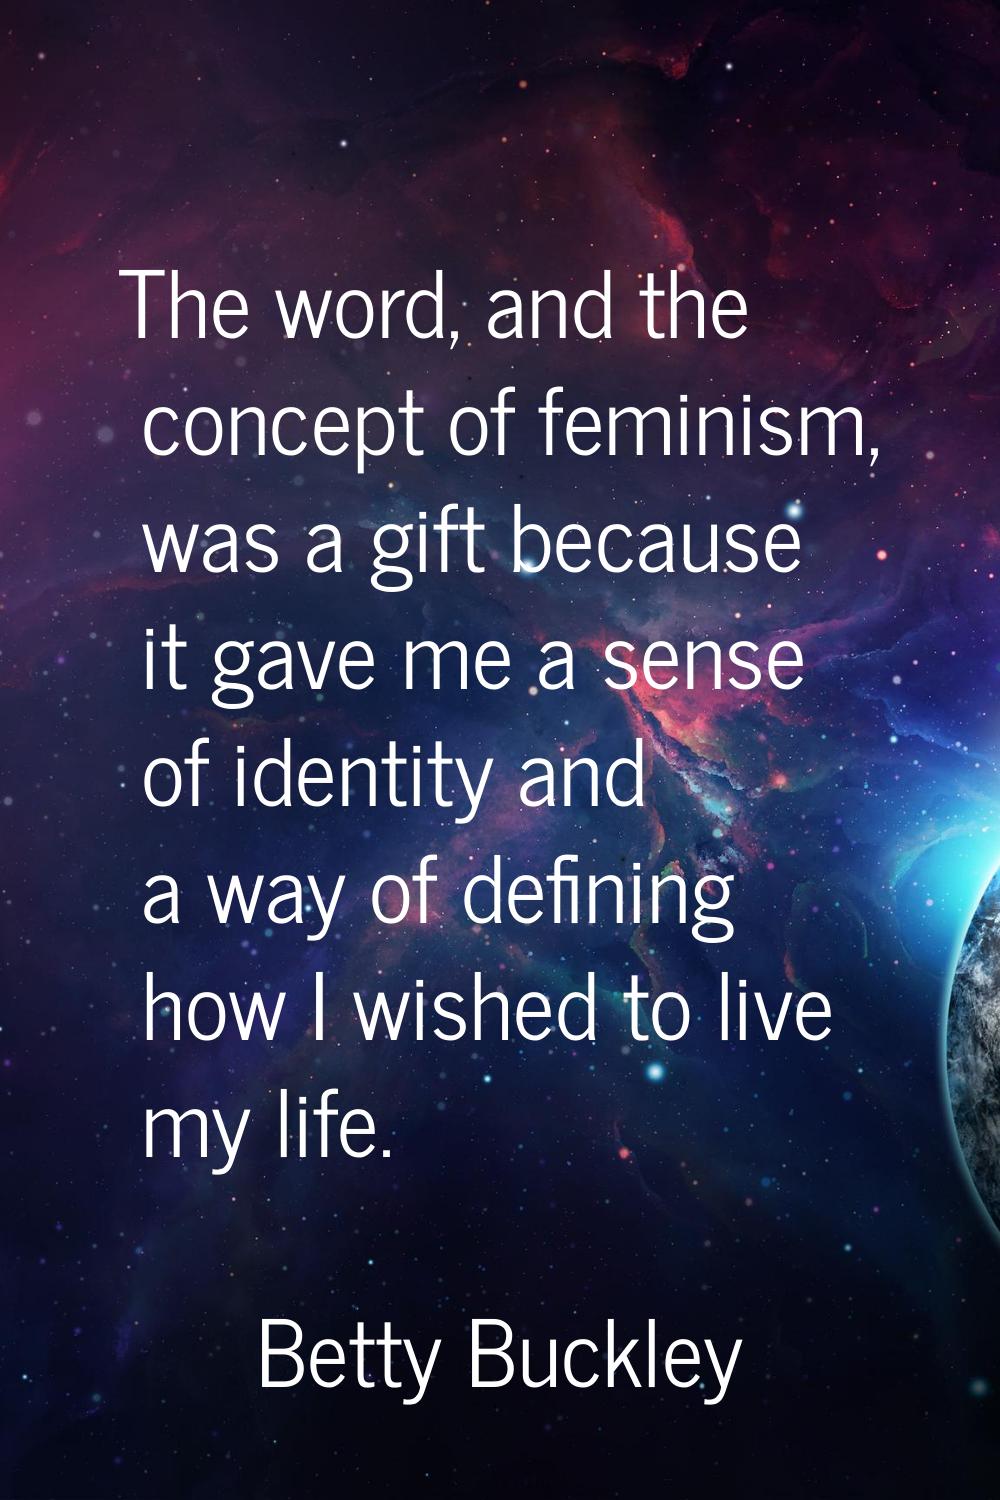 The word, and the concept of feminism, was a gift because it gave me a sense of identity and a way 